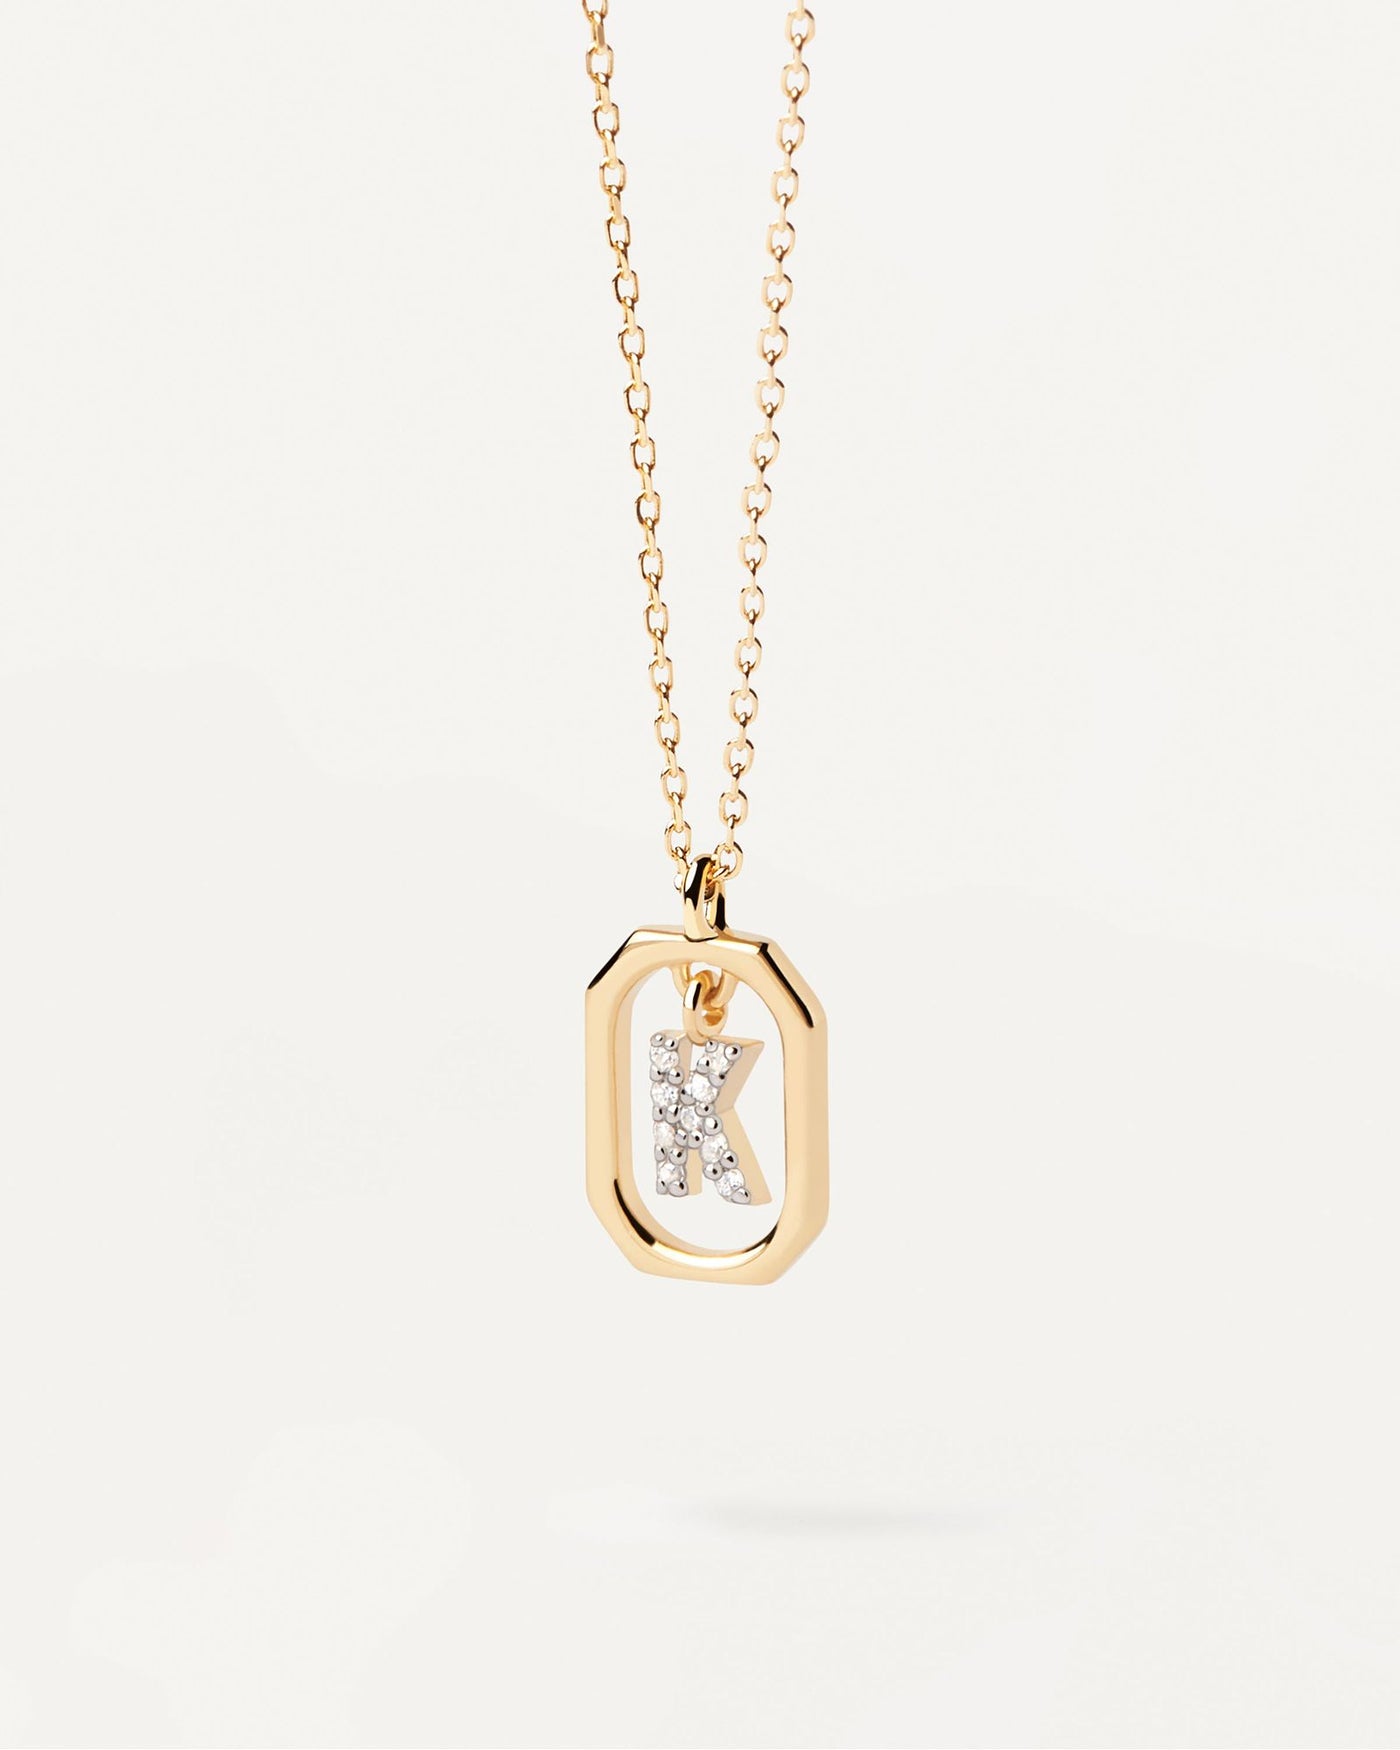 2024 Selection | Mini Letter K Necklace. Small initial K necklace in zirconia inside gold-plated silver octagonal pendant. Get the latest arrival from PDPAOLA. Place your order safely and get this Best Seller. Free Shipping.